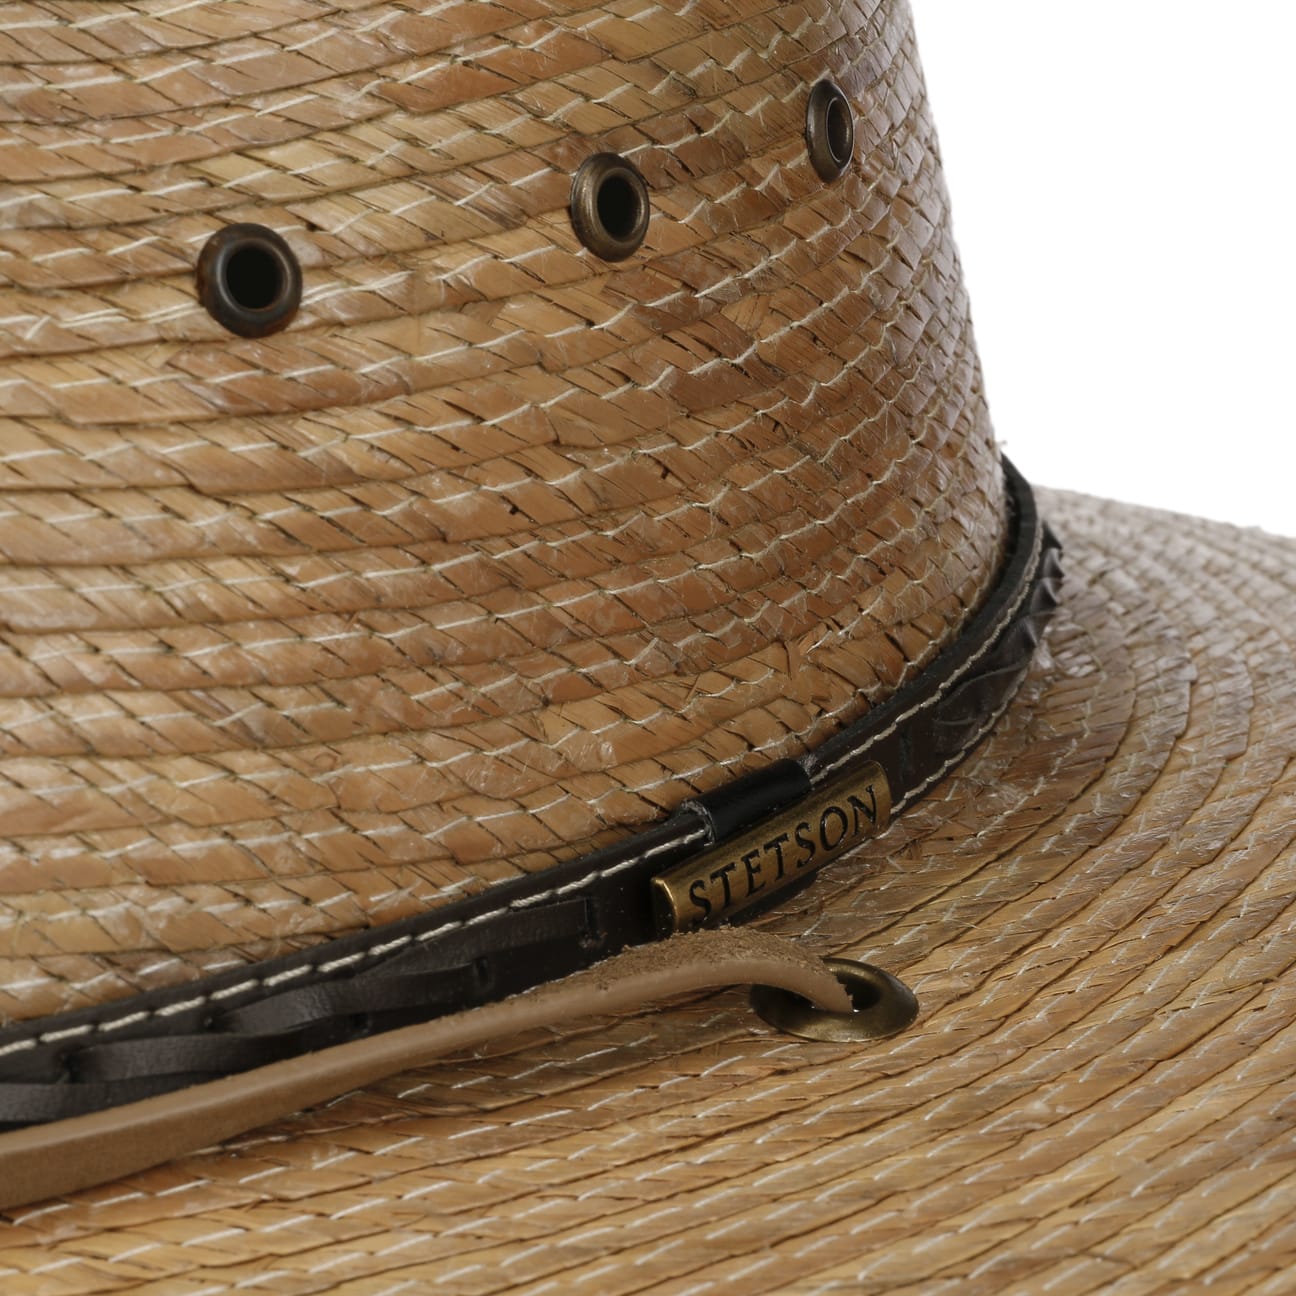 https://img.hatshopping.co.uk/Mexican-Palm-Straw-Hat-with-Chin-Strap-by-Stetson-brown.60728_4f11.jpg